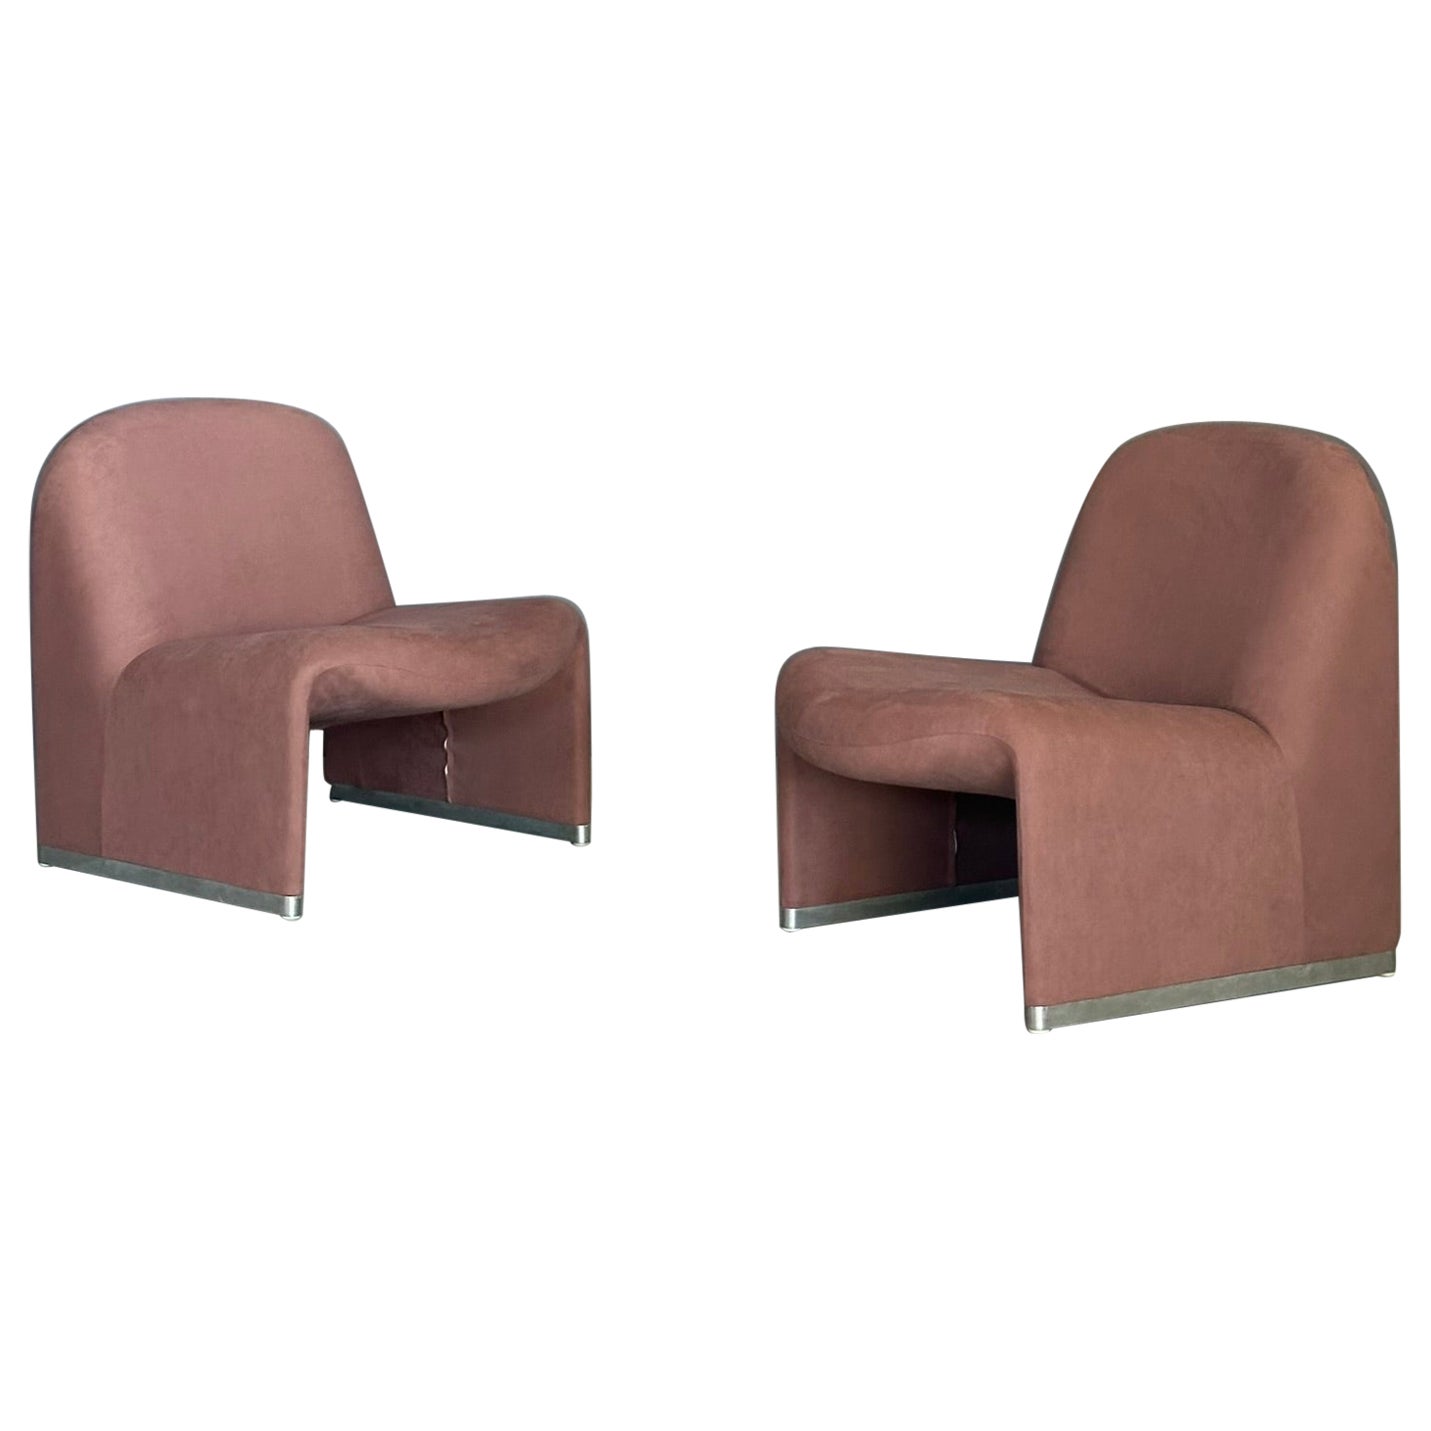 Pair of  'ALKY' armchairs design by Giancarlo Piretti for Anonima Castelli 1970